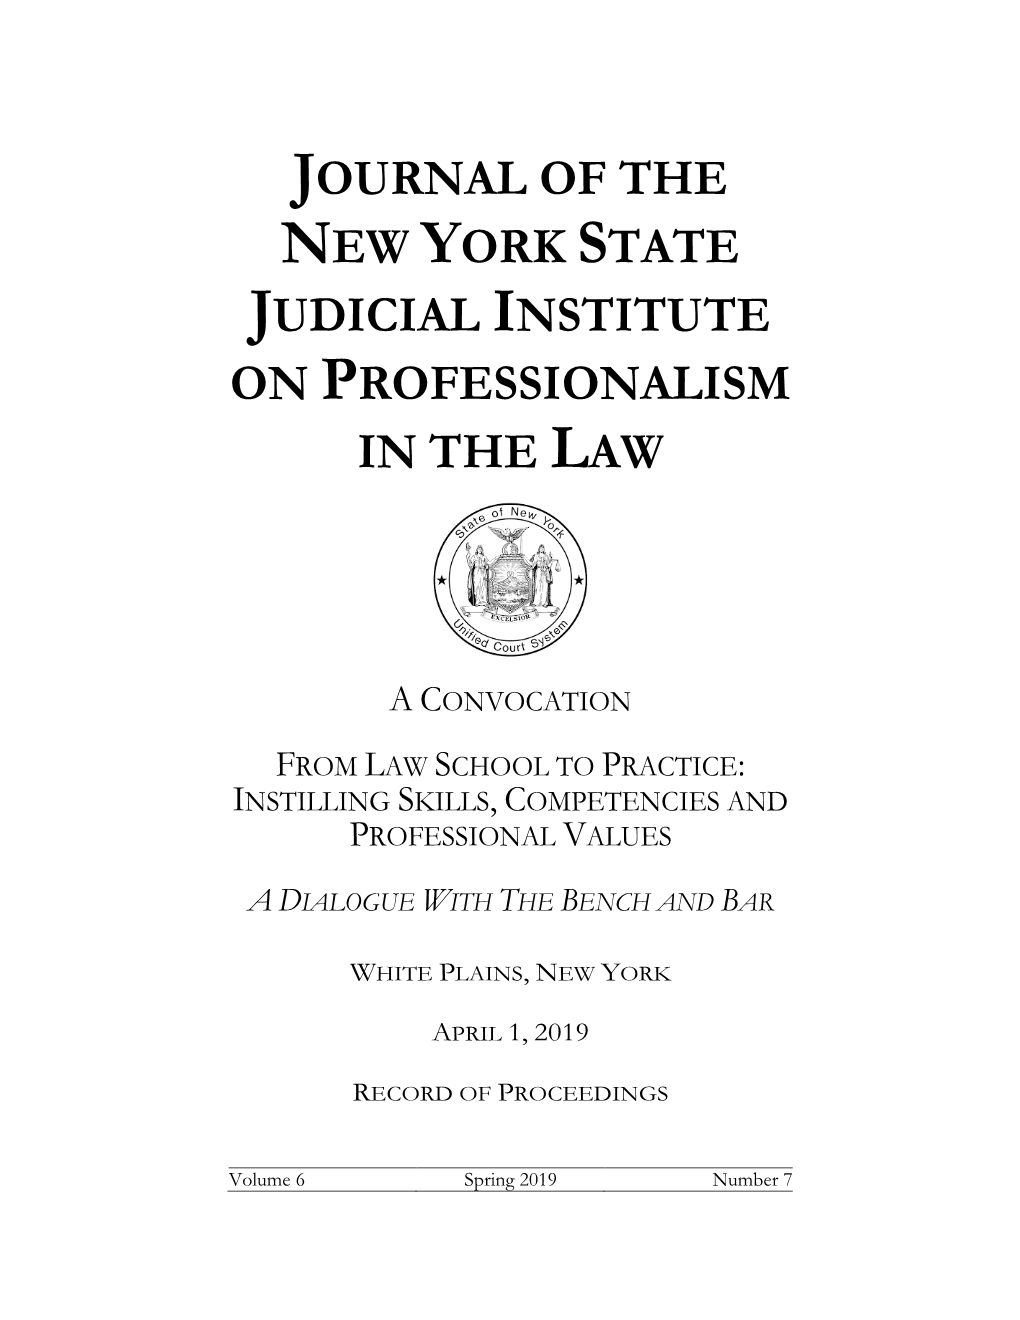 Journal of the New York State Judicial Institute on Professionalism in the Law